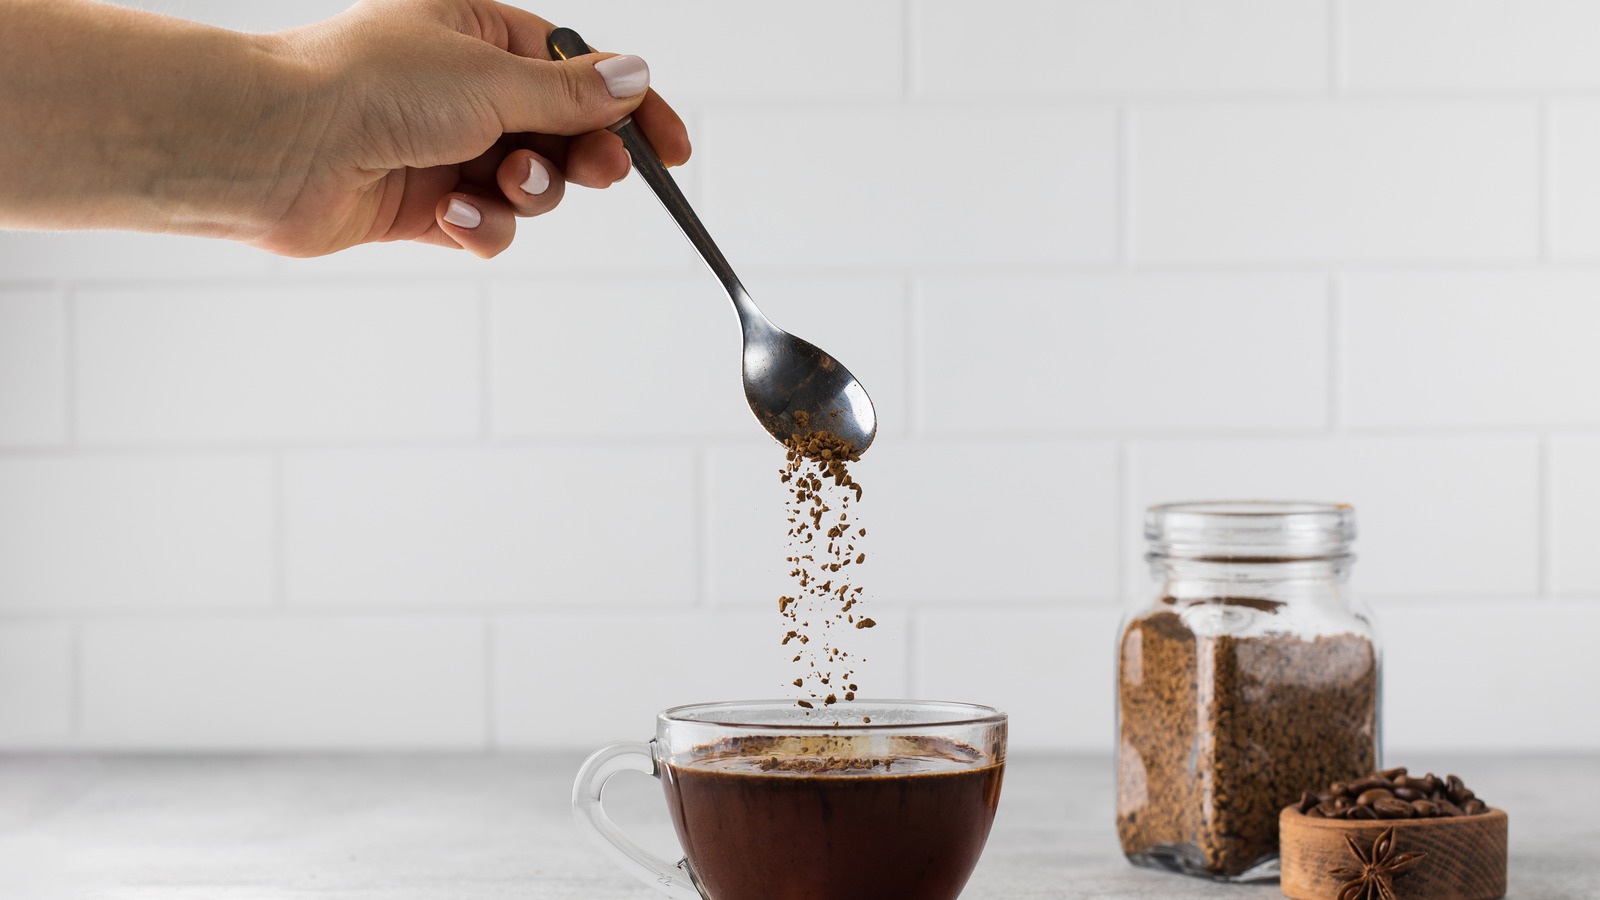 https://www.tastingtable.com/img/gallery/15-ways-to-use-instant-coffee-other-than-brewing-it/l-intro-1685890268.jpg